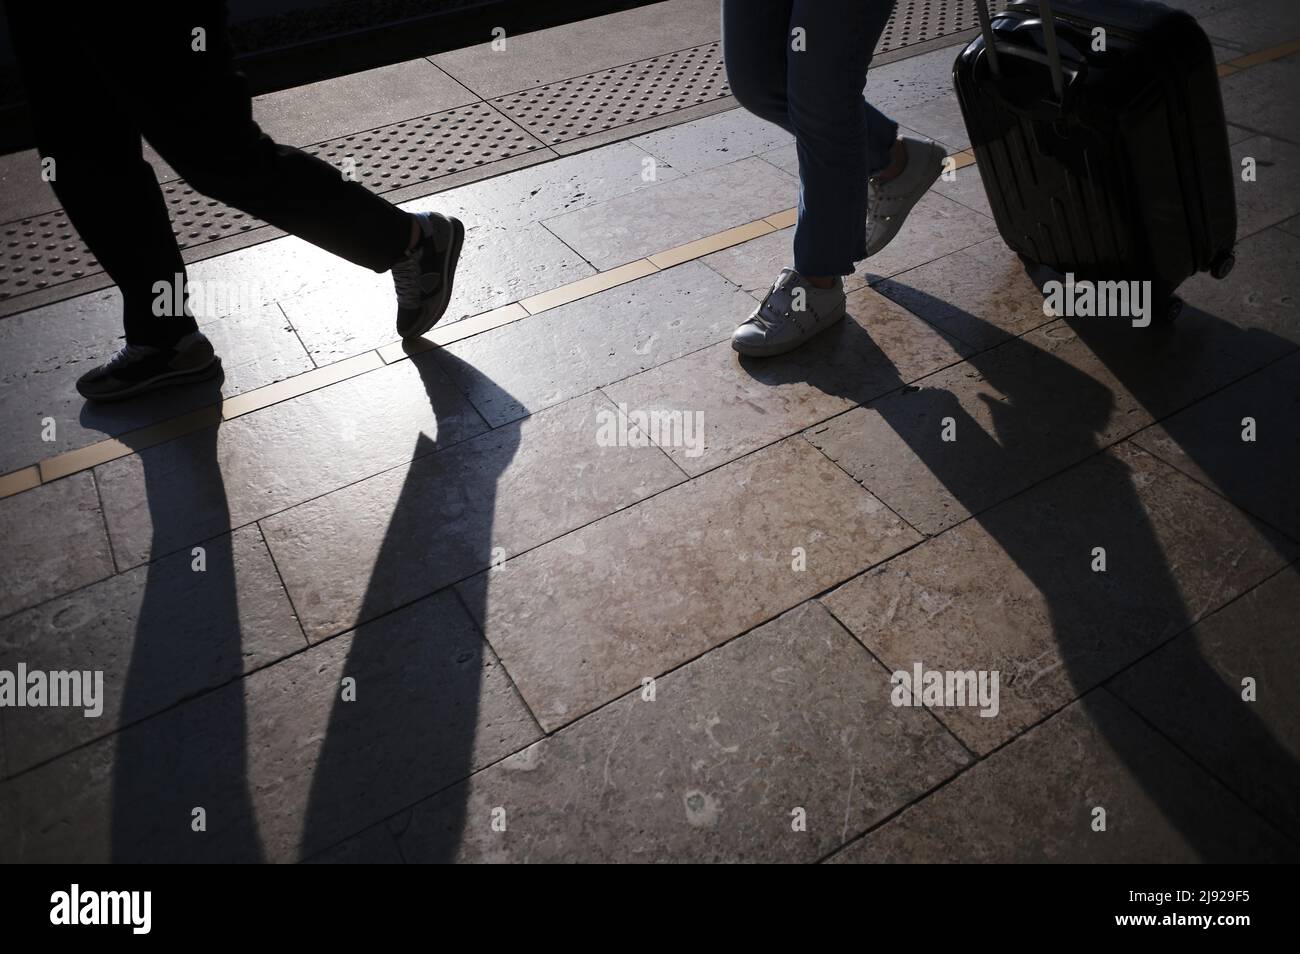 Passengers on the platform, silhouette, shadow, hand luggage, suitcase trolley, Gare TGV, Aix-en-Provence, Bouches-du-Rhone, France Stock Photo